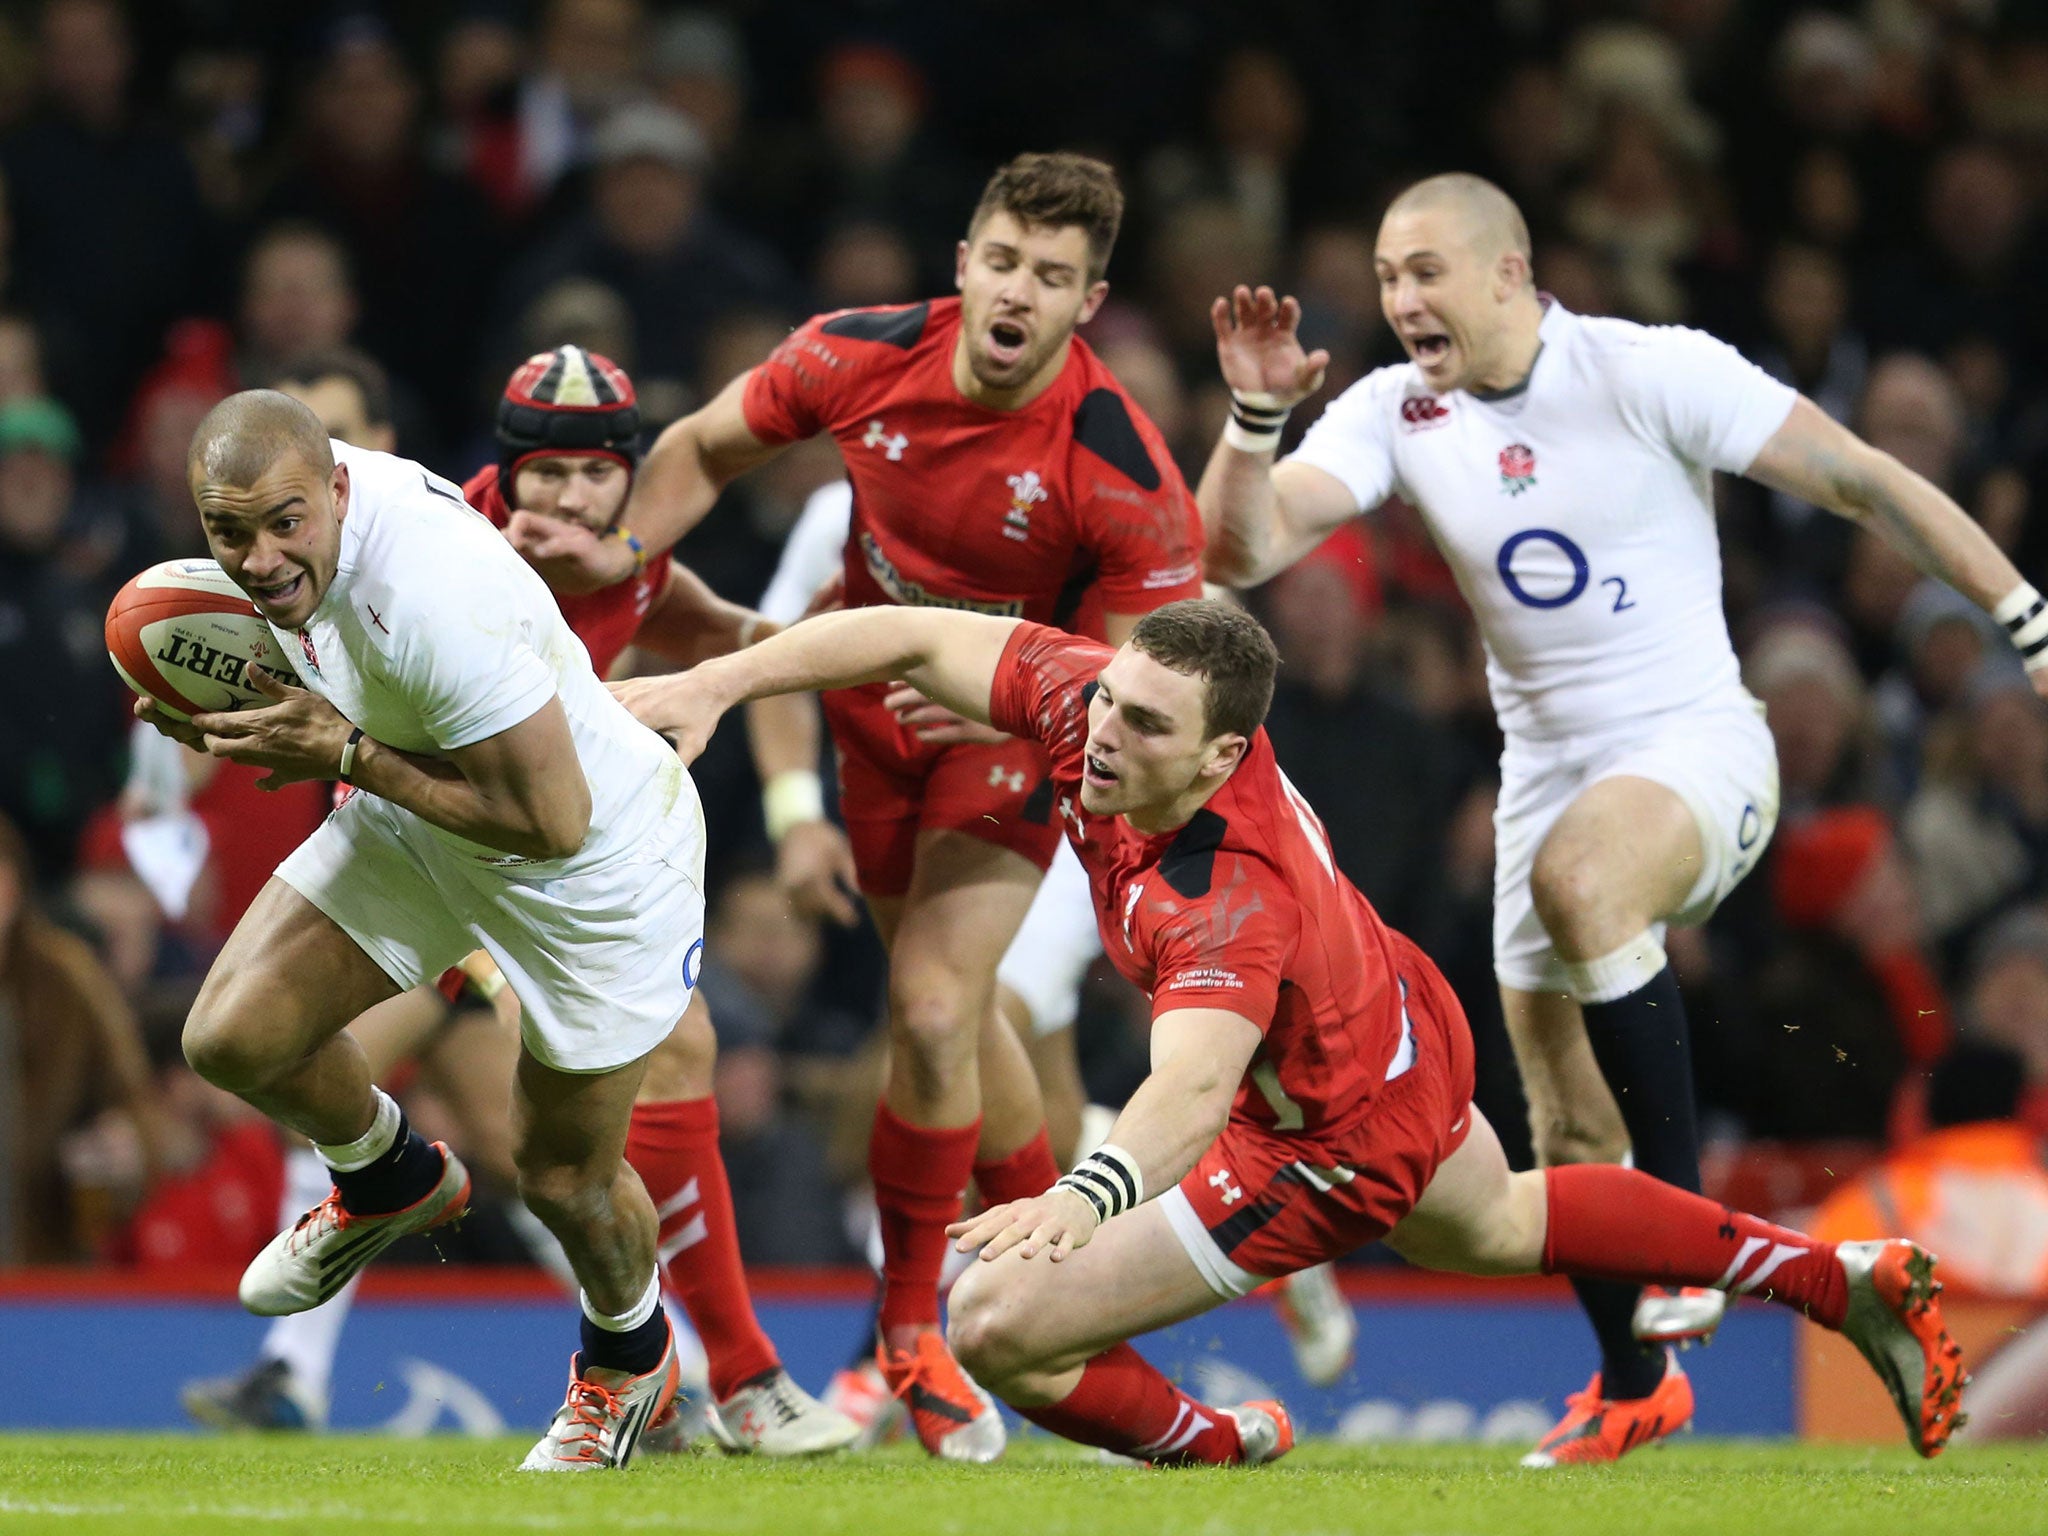 Jonathan Joseph scores England’s second try during their victory over Wales in the Six Nations opener at the Millennium Stadium in Cardiff